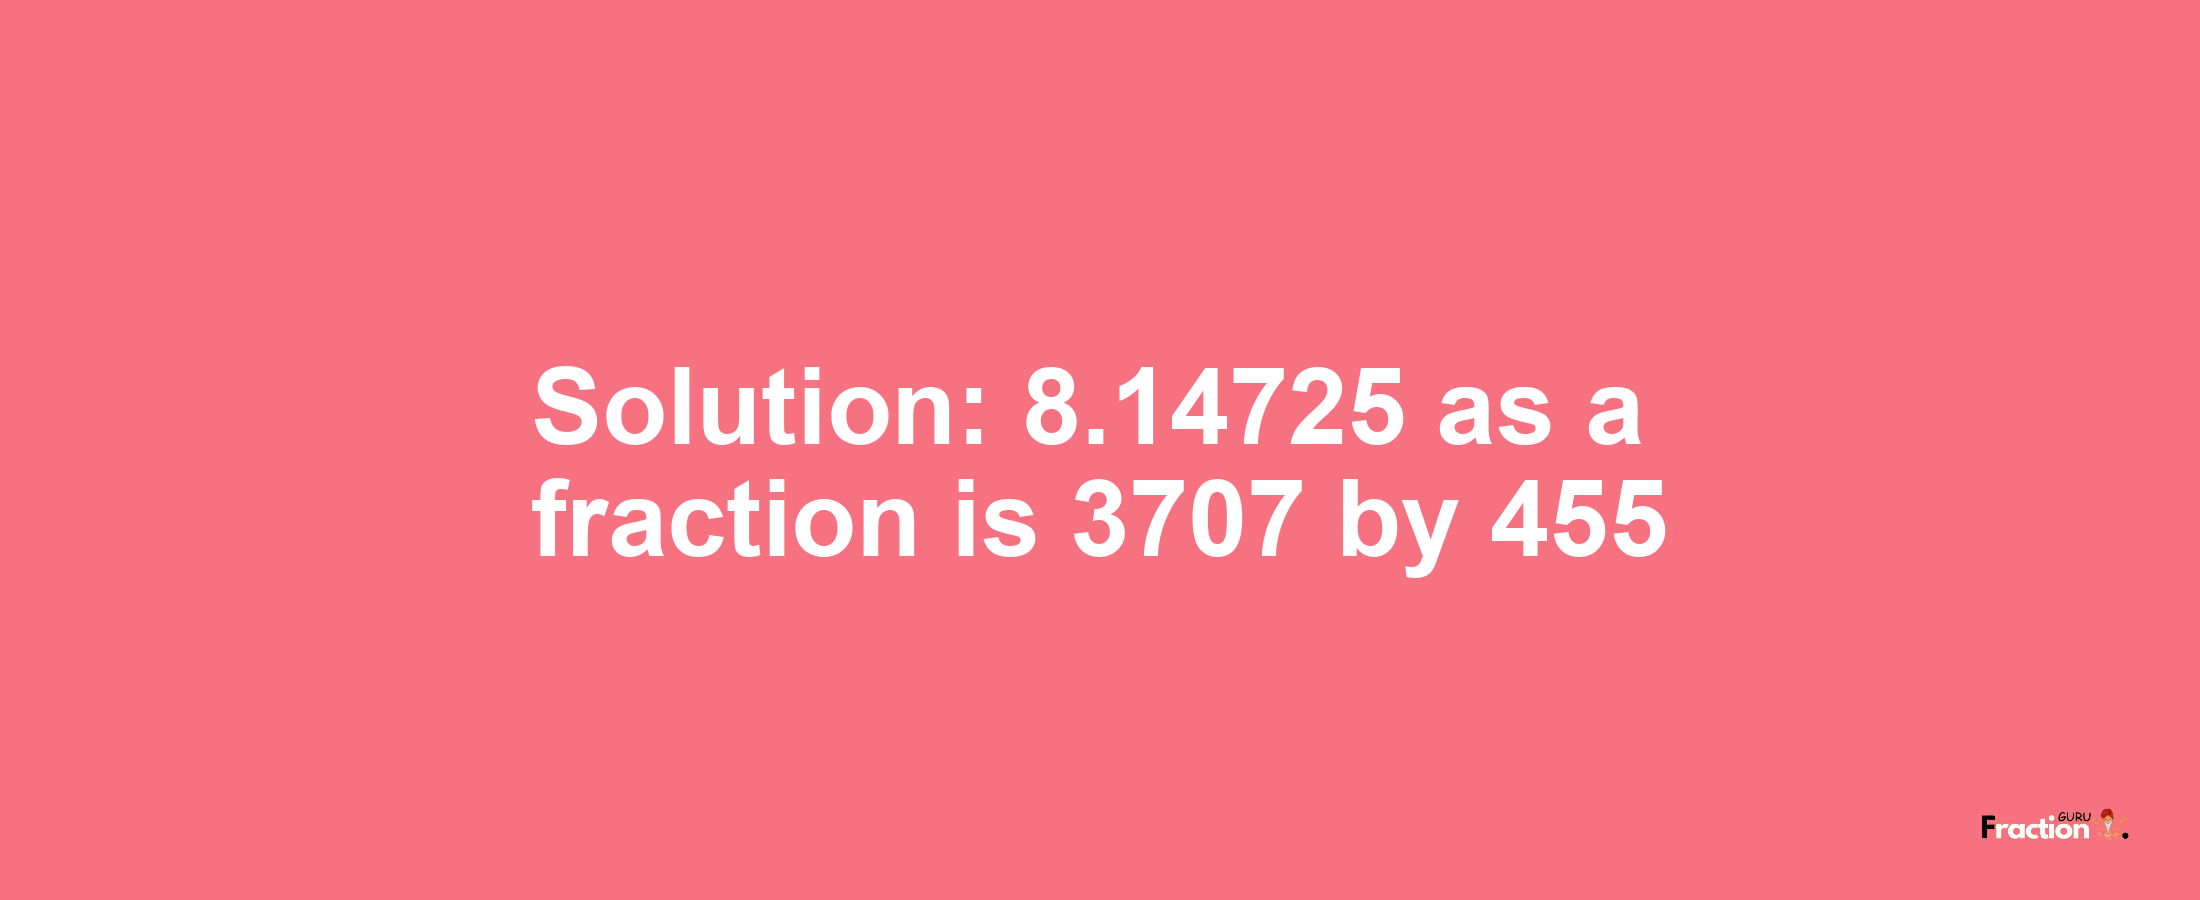 Solution:8.14725 as a fraction is 3707/455